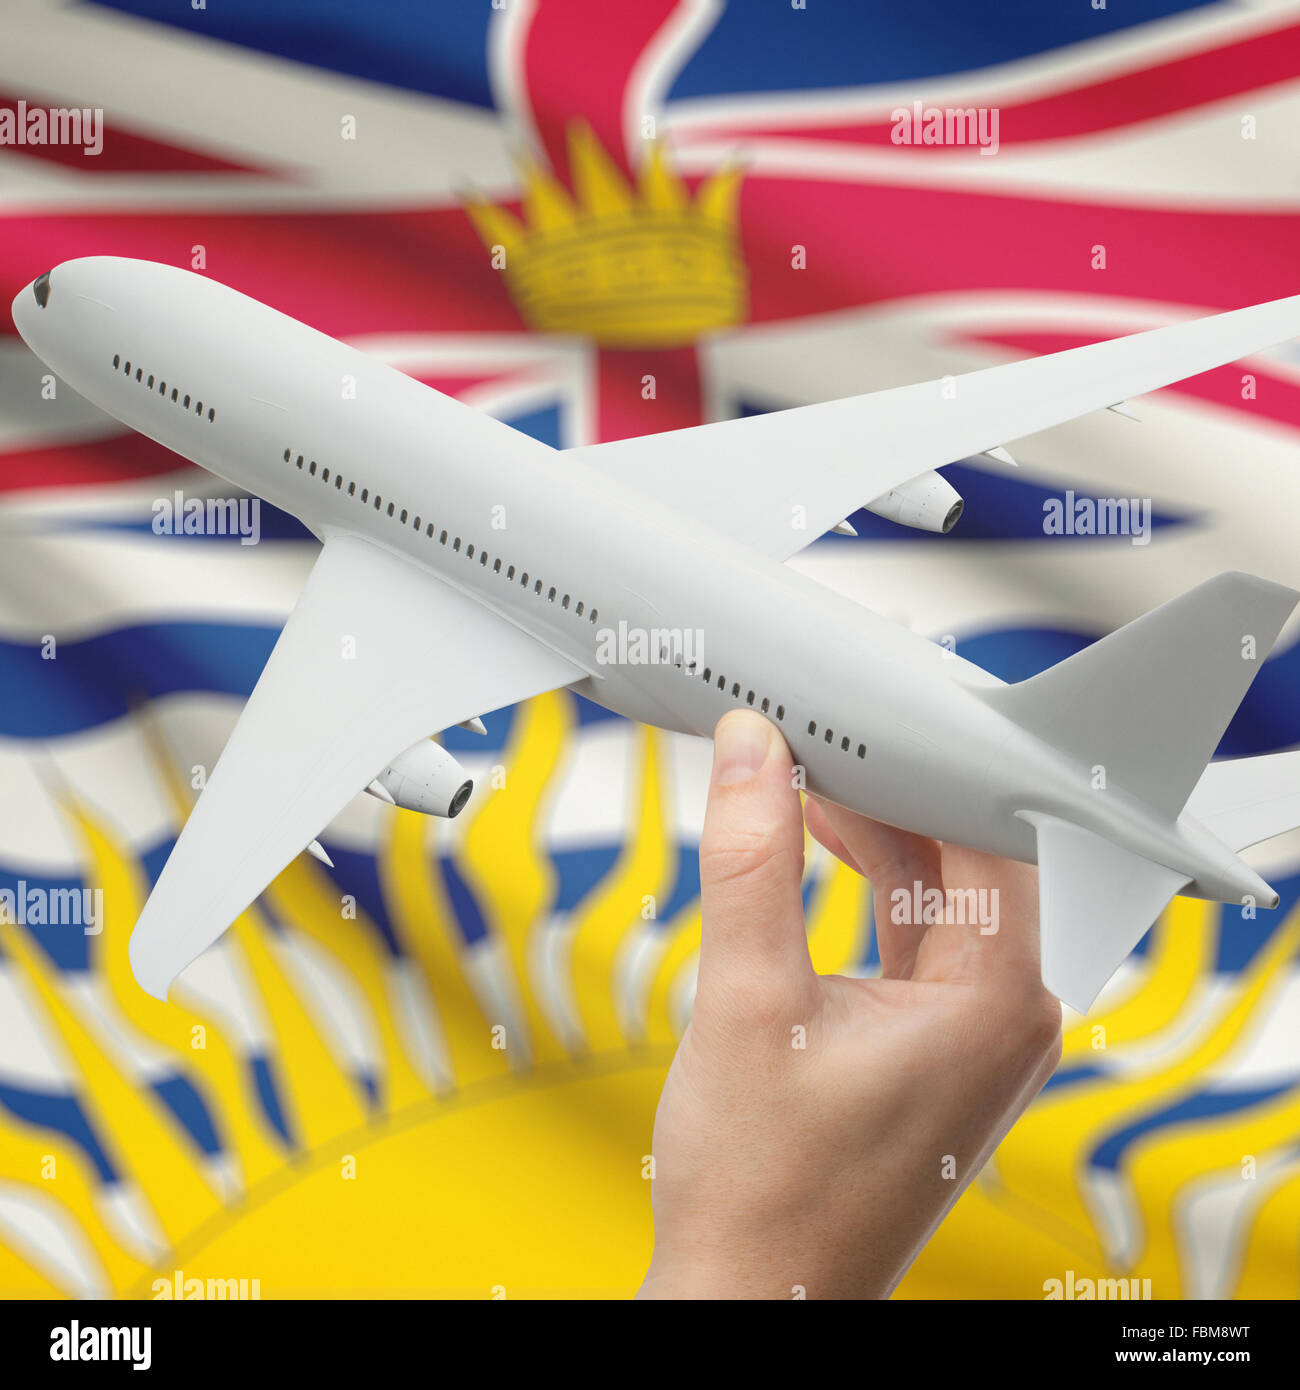 Airplane in hand with Canadian province or territory flag on background series - British Columbia Stock Photo